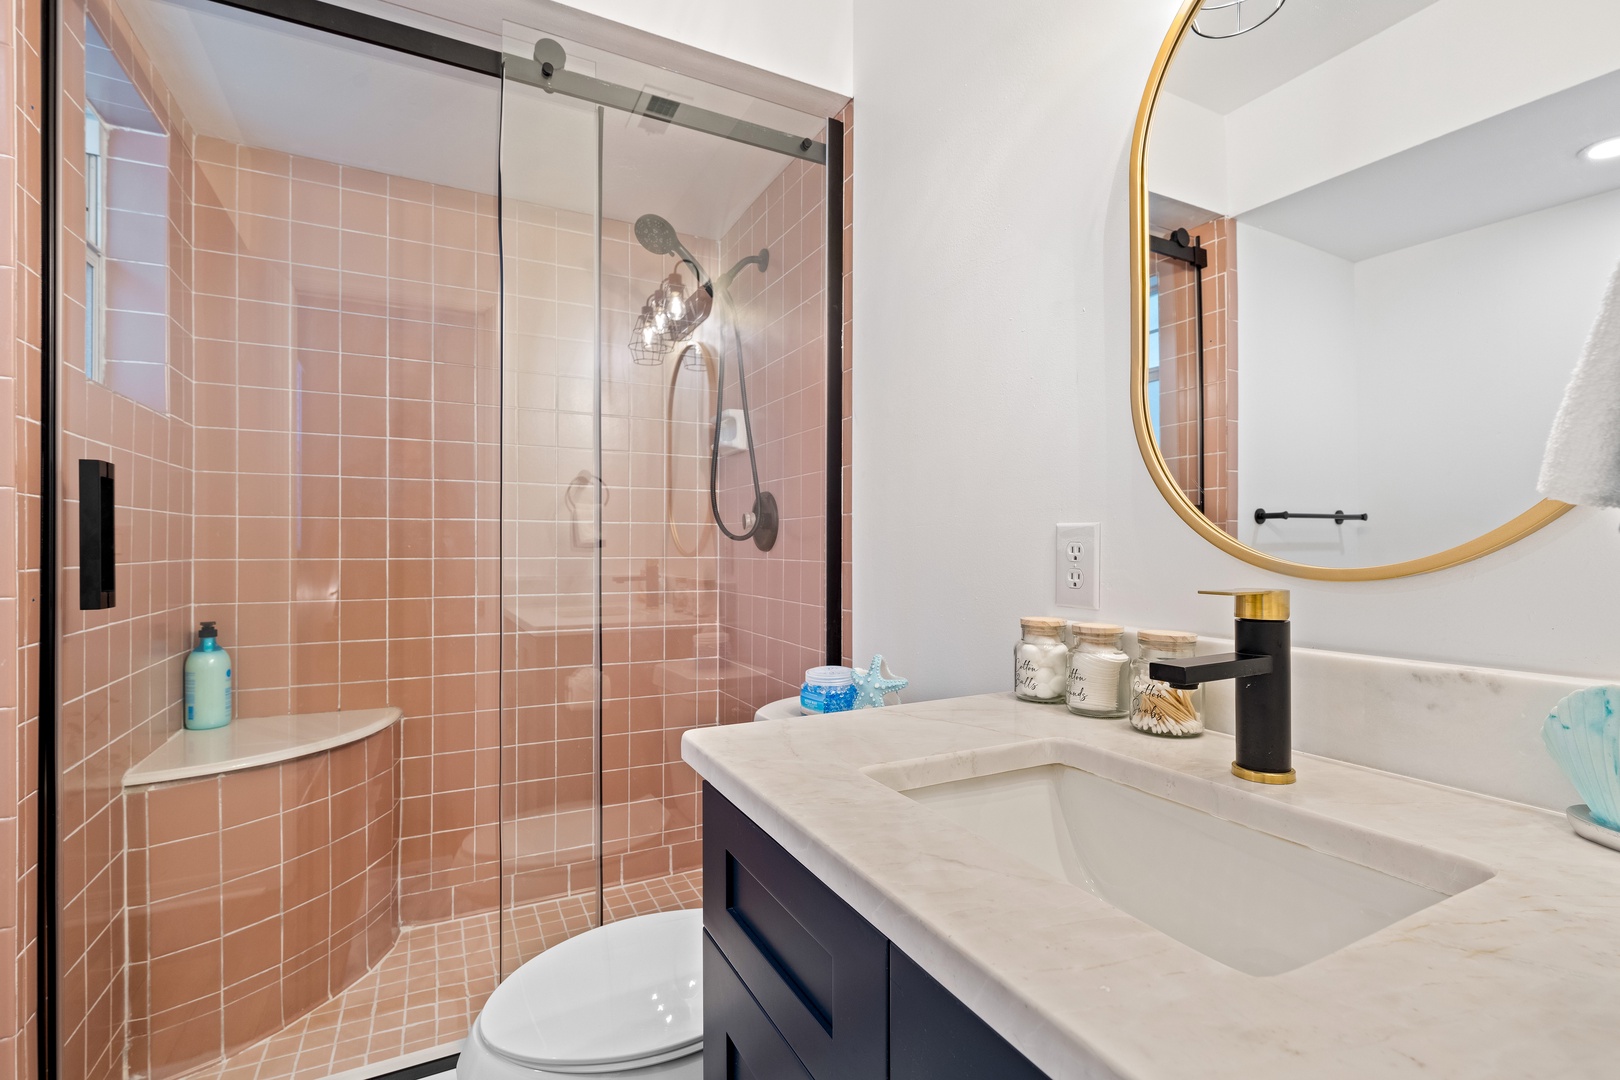 Enjoy ensuite luxury with chic single vanity and inviting glass shower